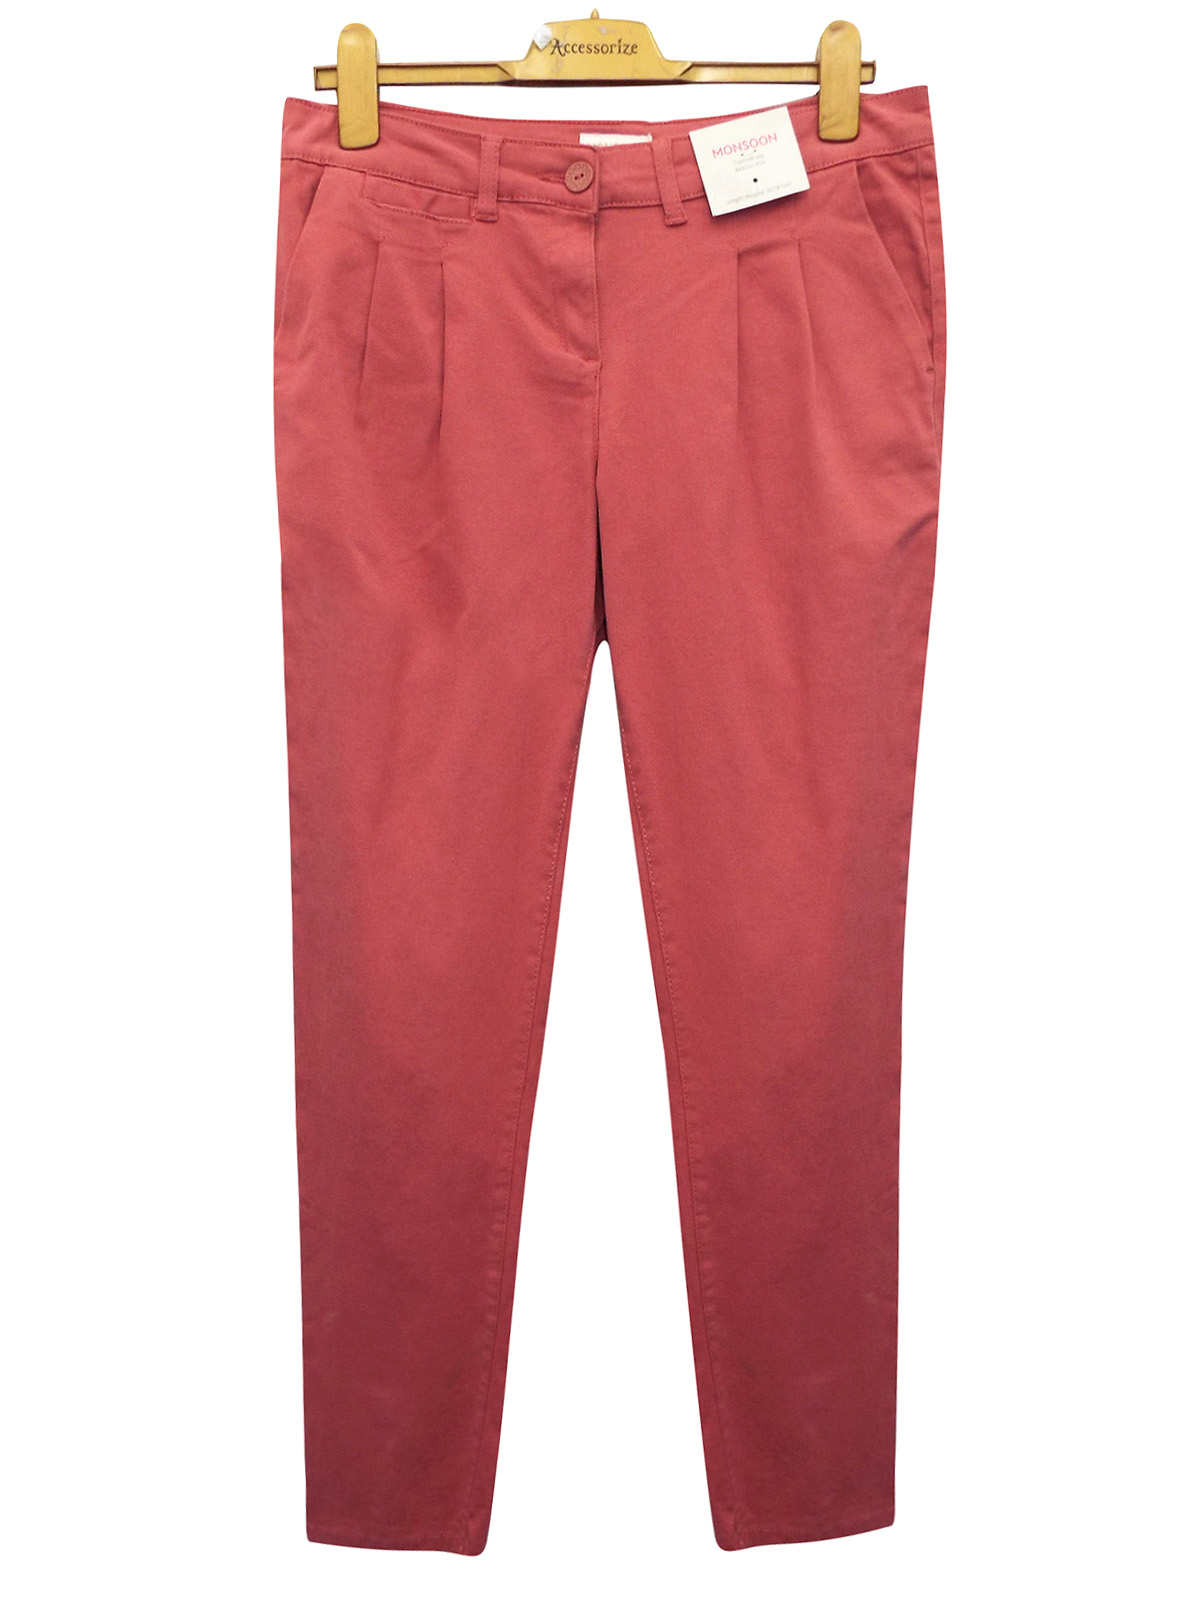 M0NSOON ASSORTED Ladies Chino Trousers - Size 8 to 14